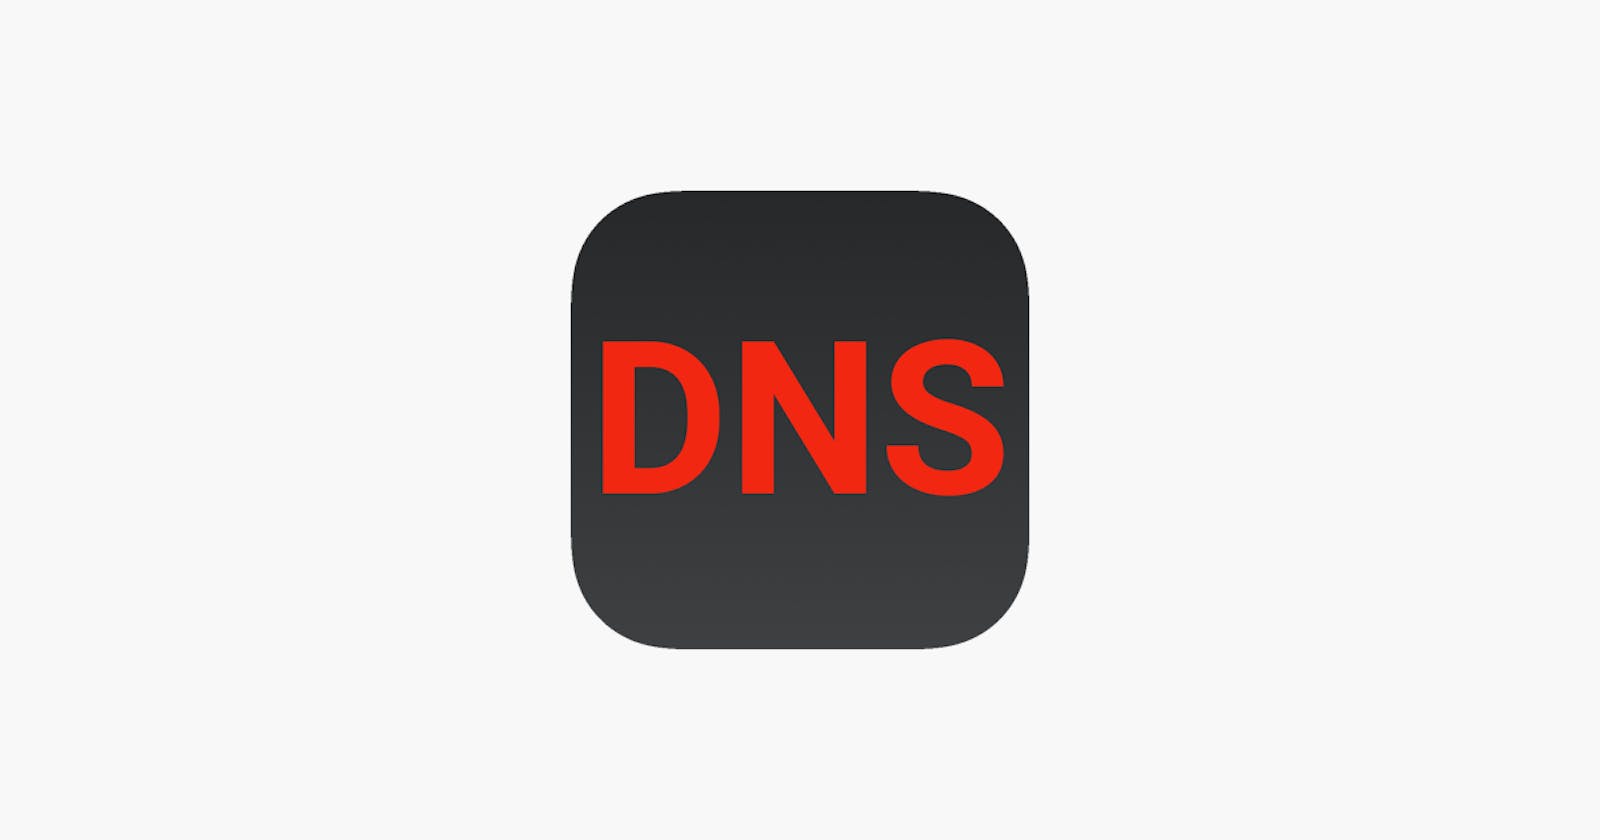 [Network & HTTP] Domain Name System (DNS)